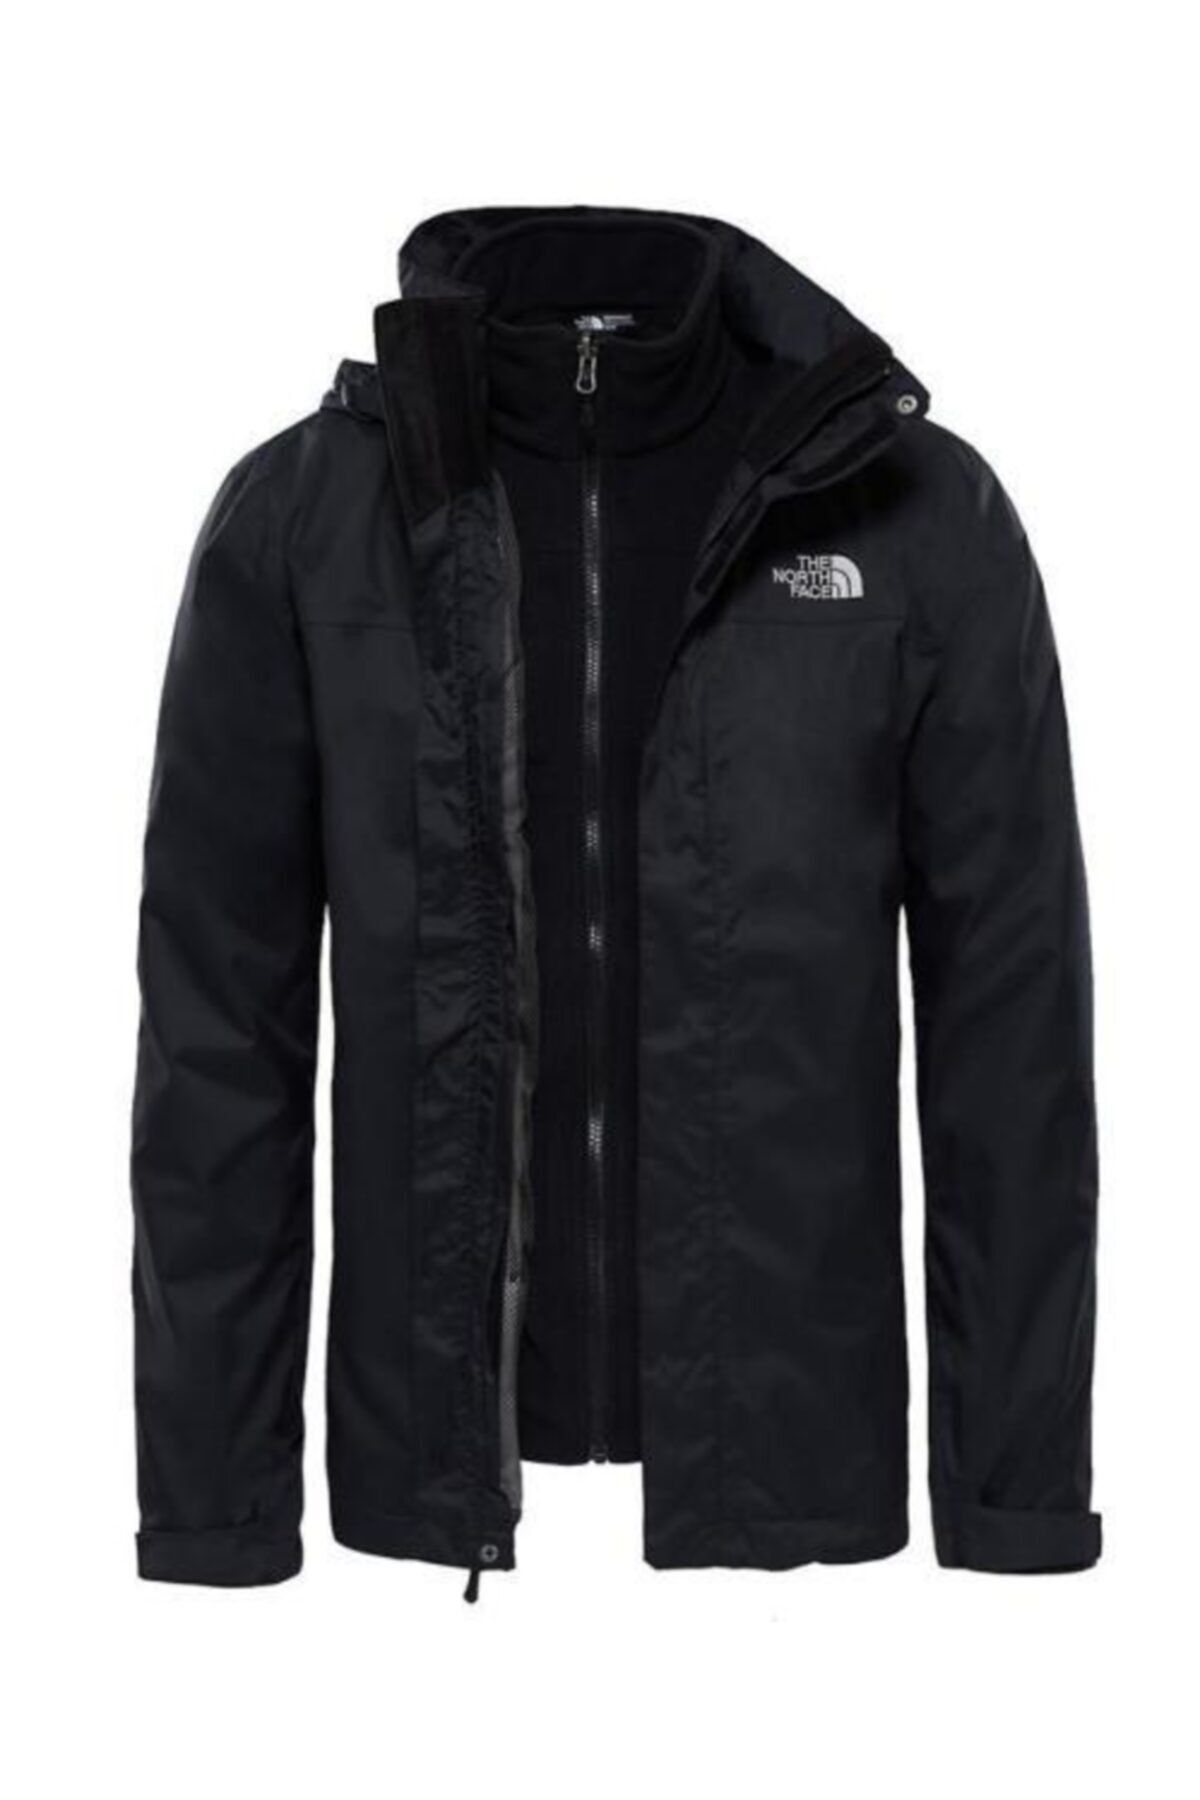 The North Face Evolve Iı Triclimate Jacket Erkek Siyah Outdoor Mont Nf00cg55jk31